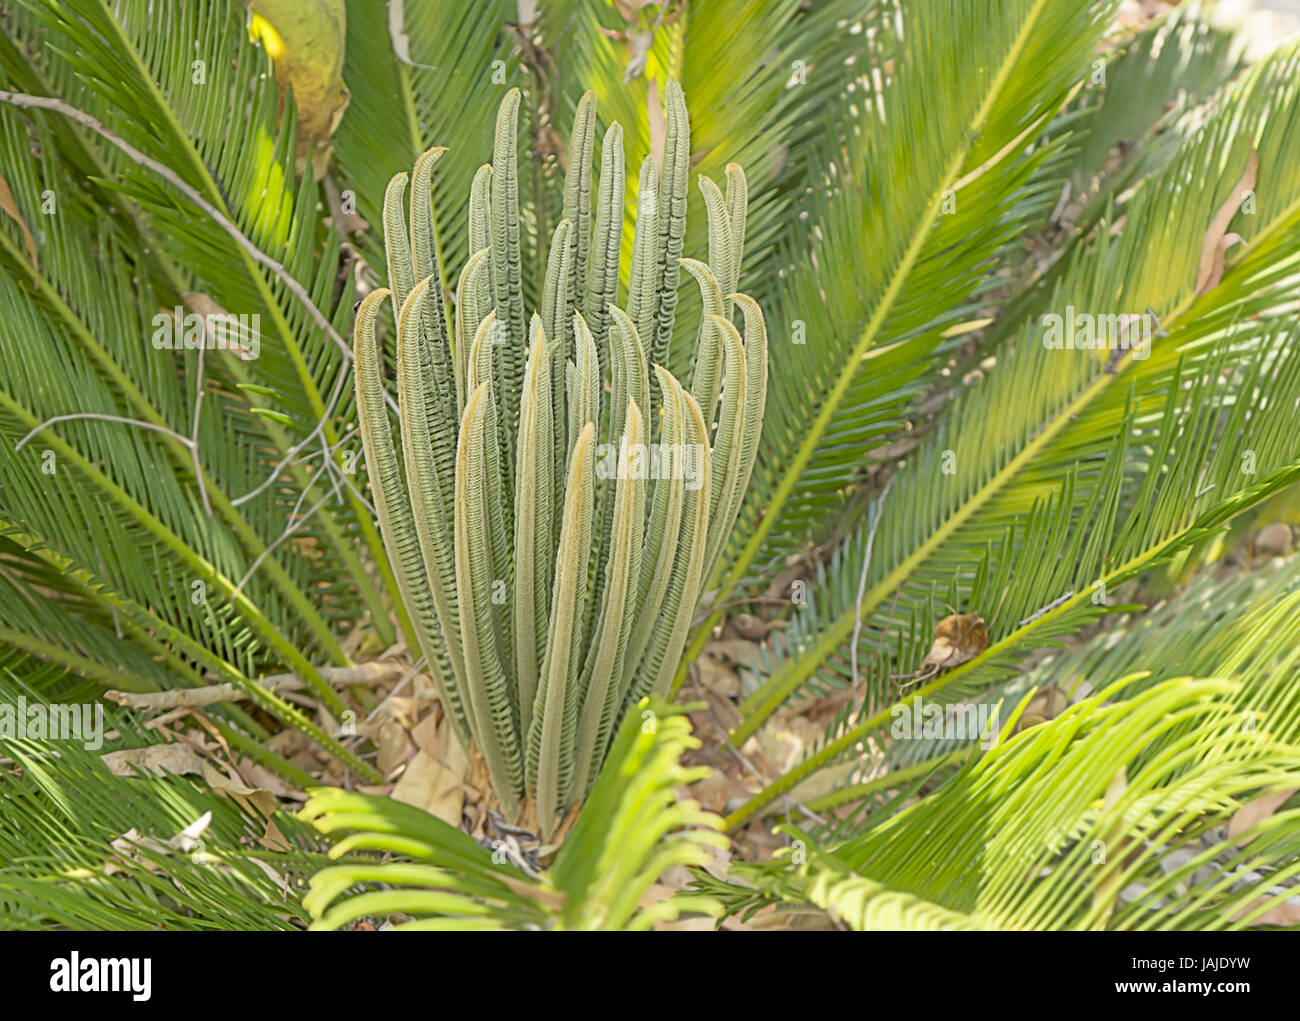 Australian native plant Cycad closeup with palm leaves and fronds Stock Photo